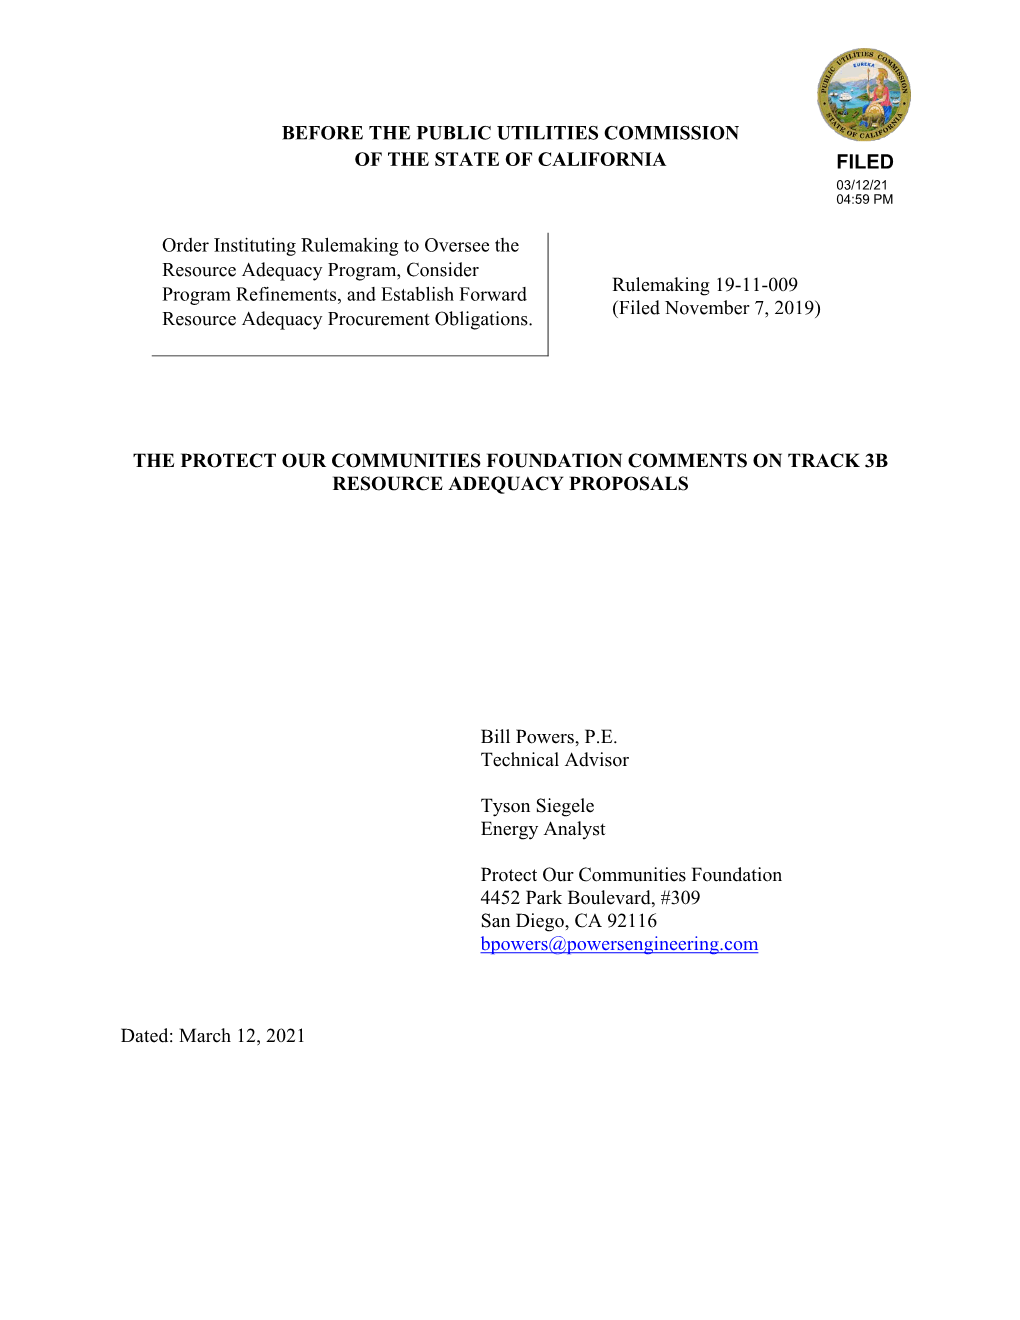 Before the Public Utilities Commission of the State of California Filed 03/12/21 04:59 Pm